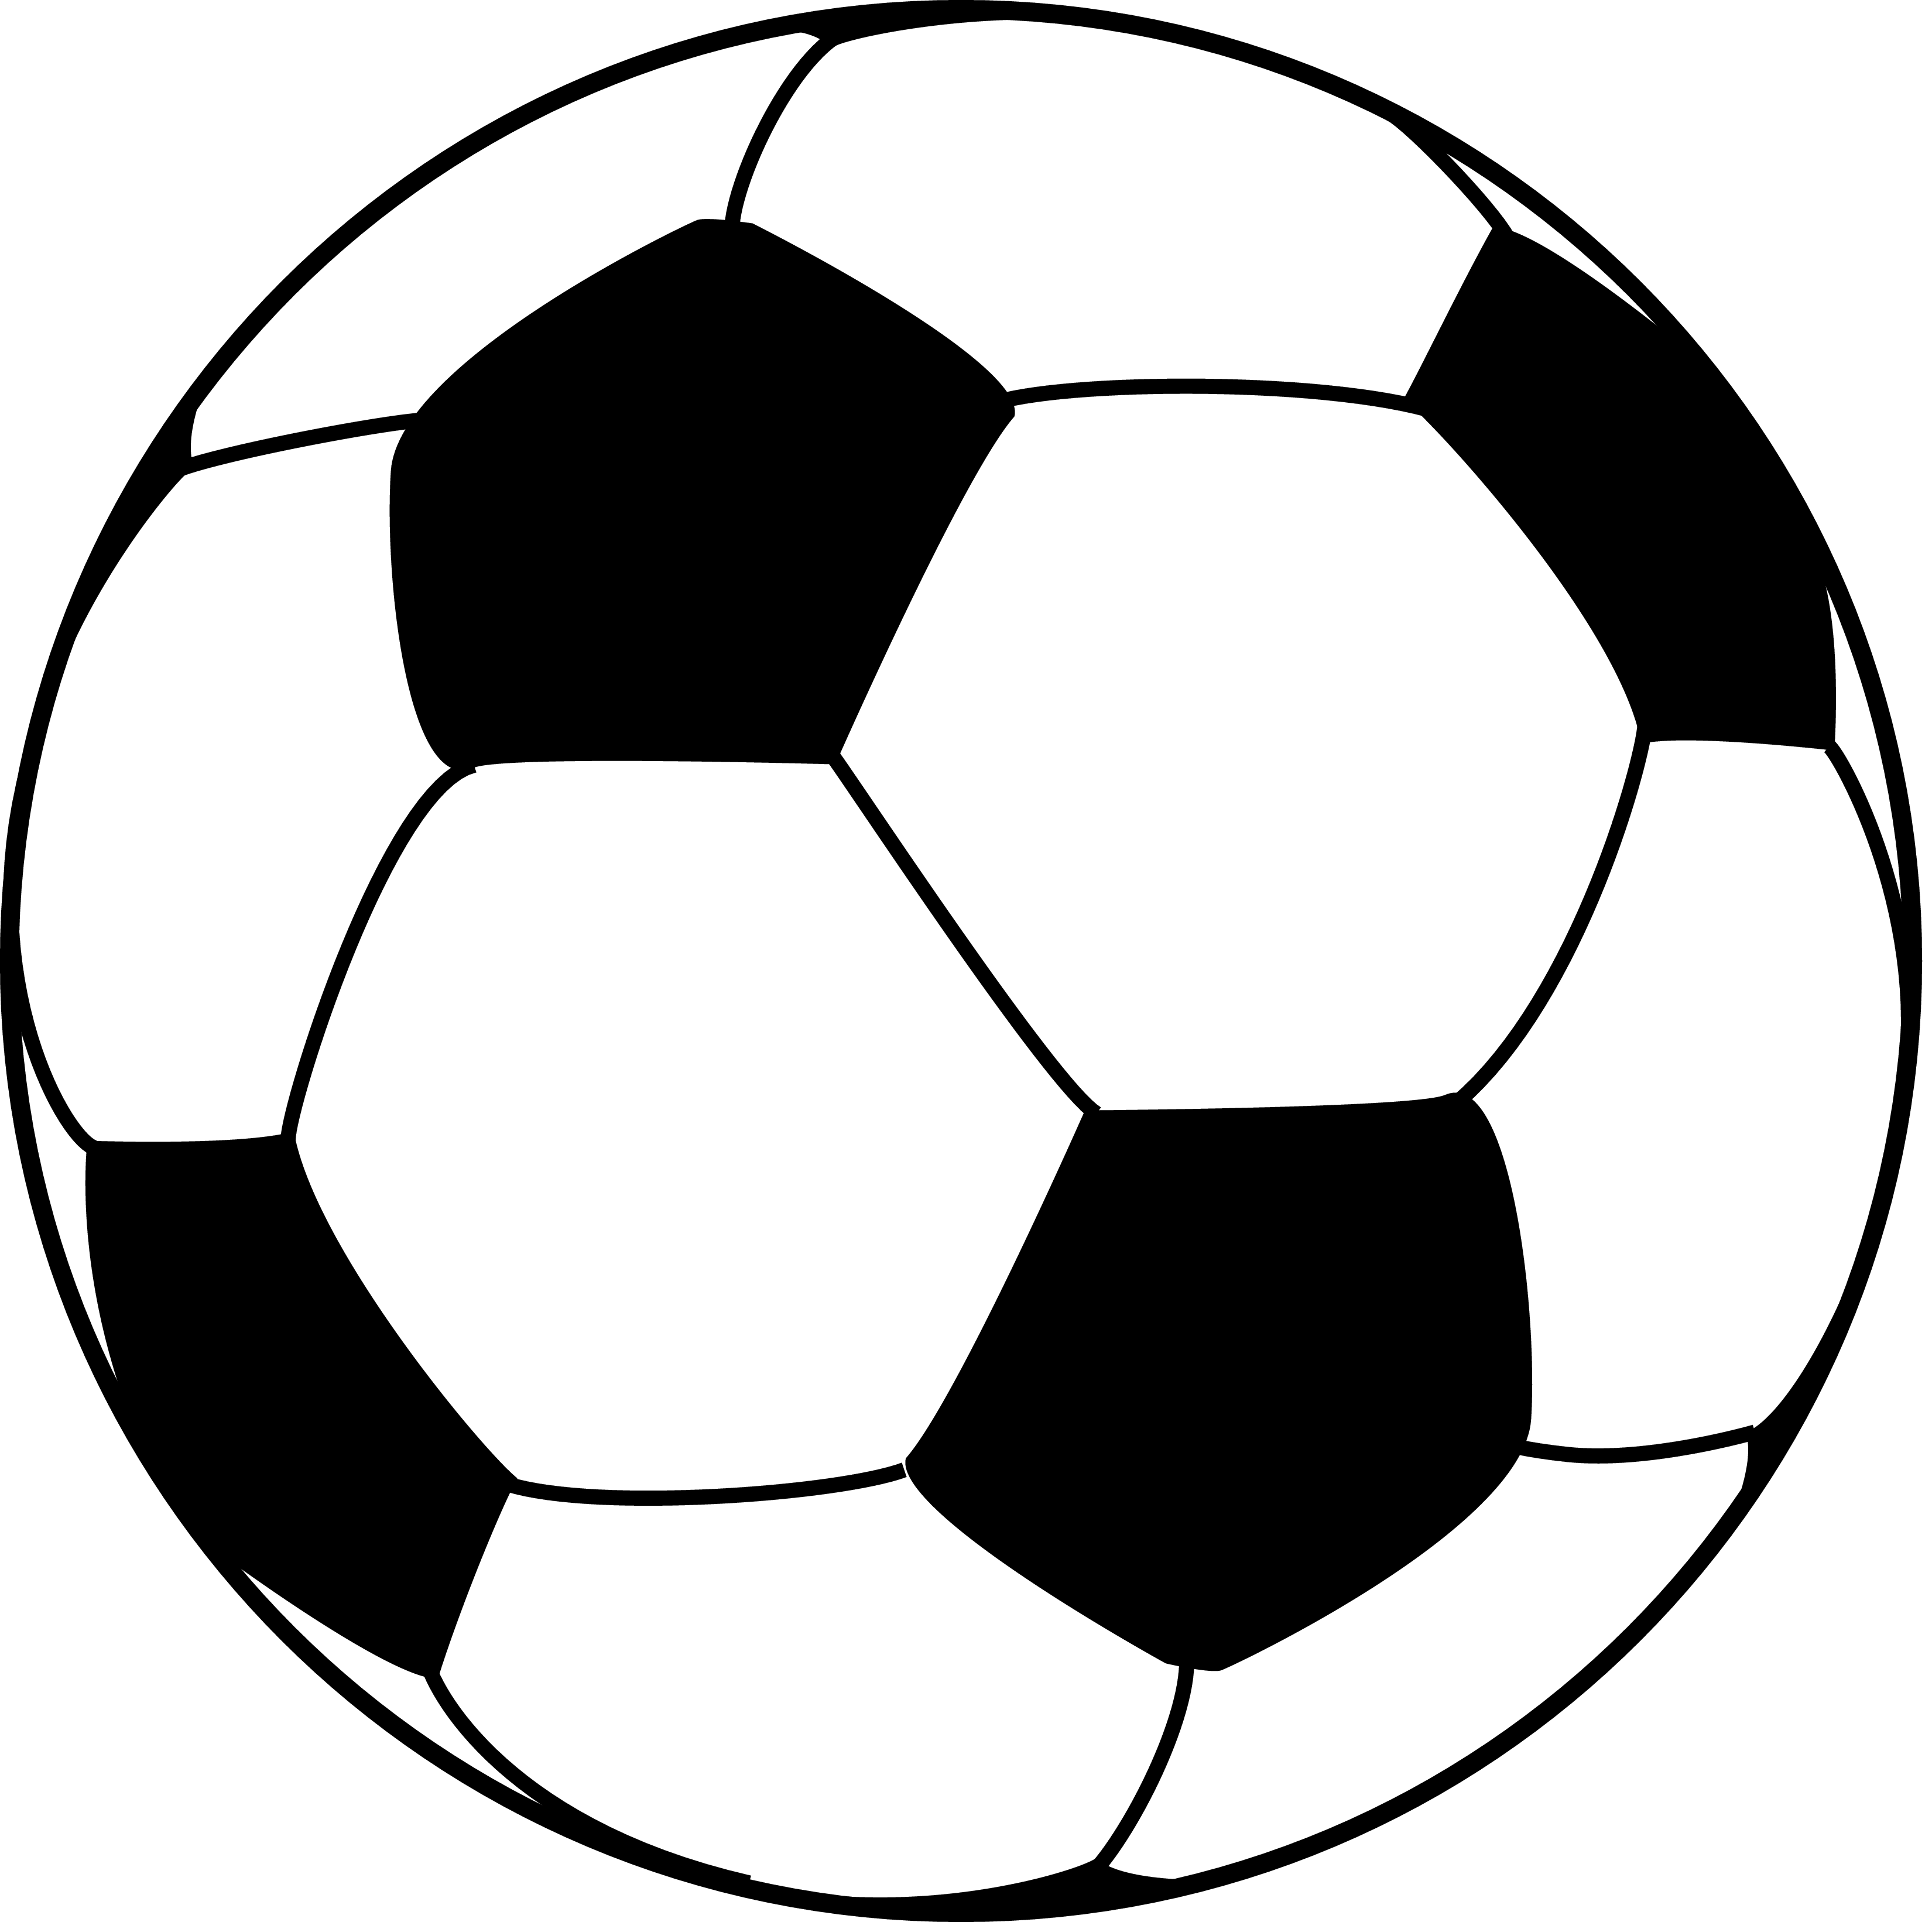 Ball drawing easy at. Words clipart soccer